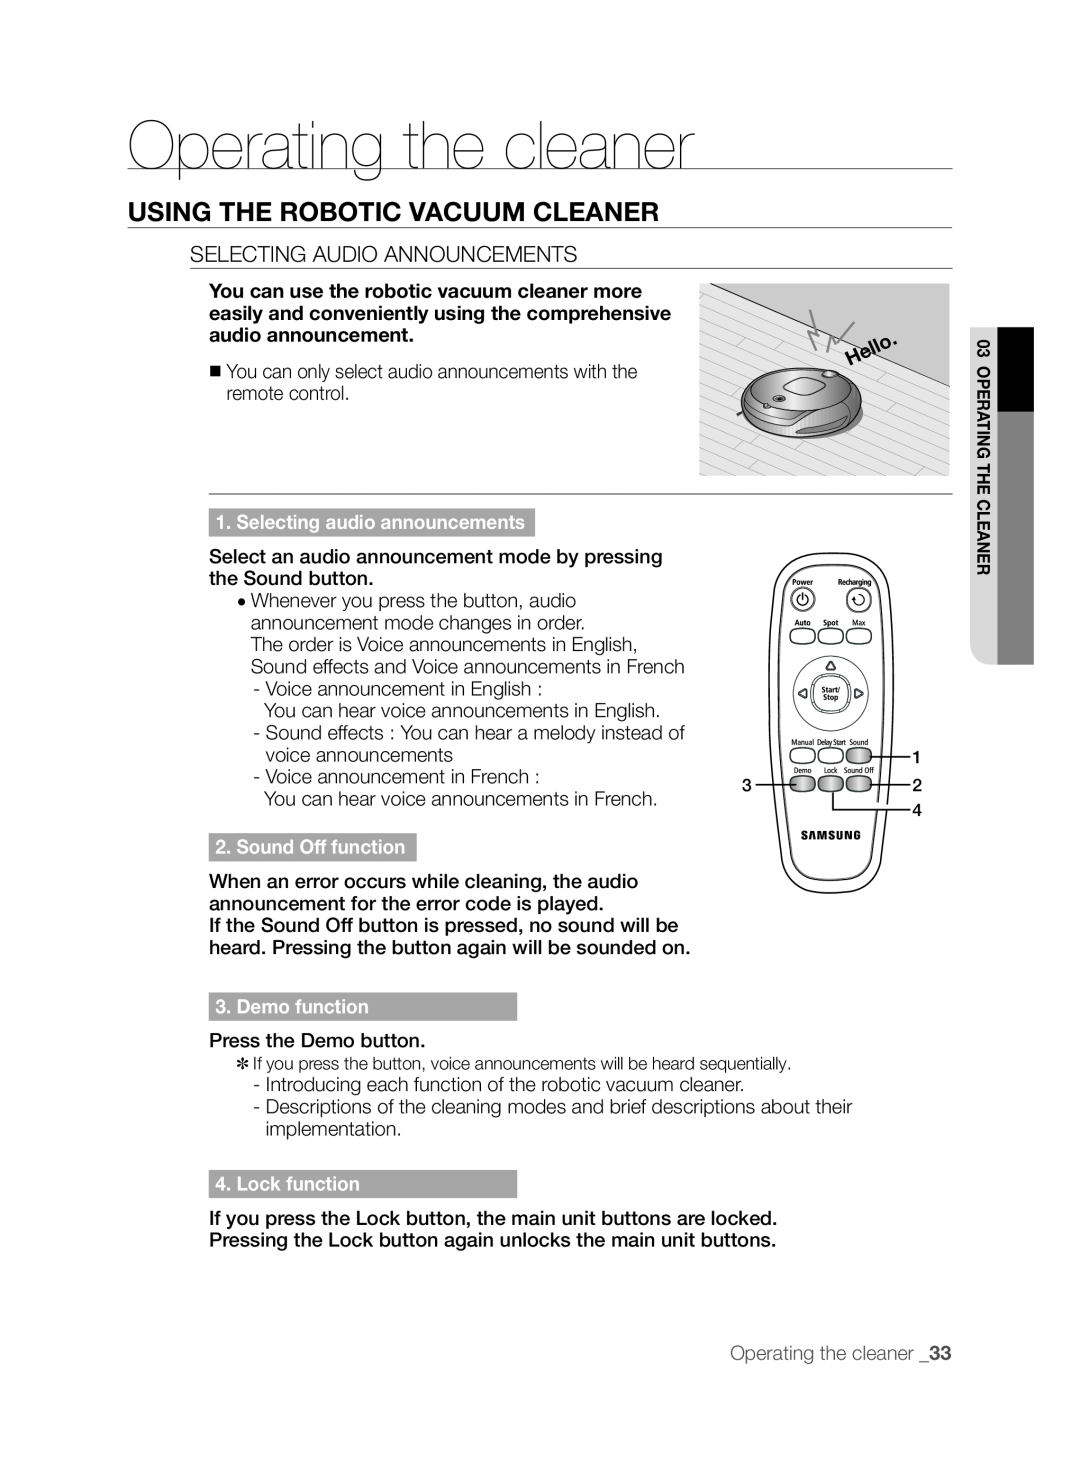 Samsung VCR8830T1R Operating the cleaner, Using the robotic vacuum cleaner, Selecting audio announcements, Demo function 